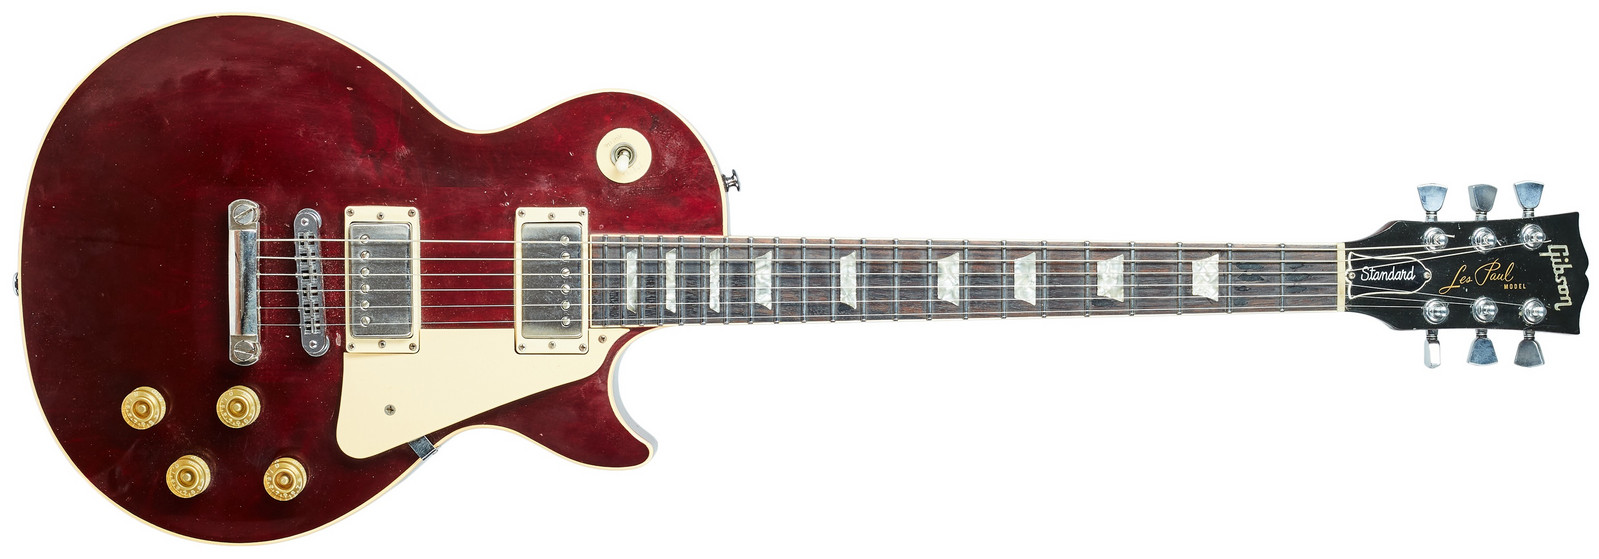 Gibson 1983 Les Paul Standard Wine Red